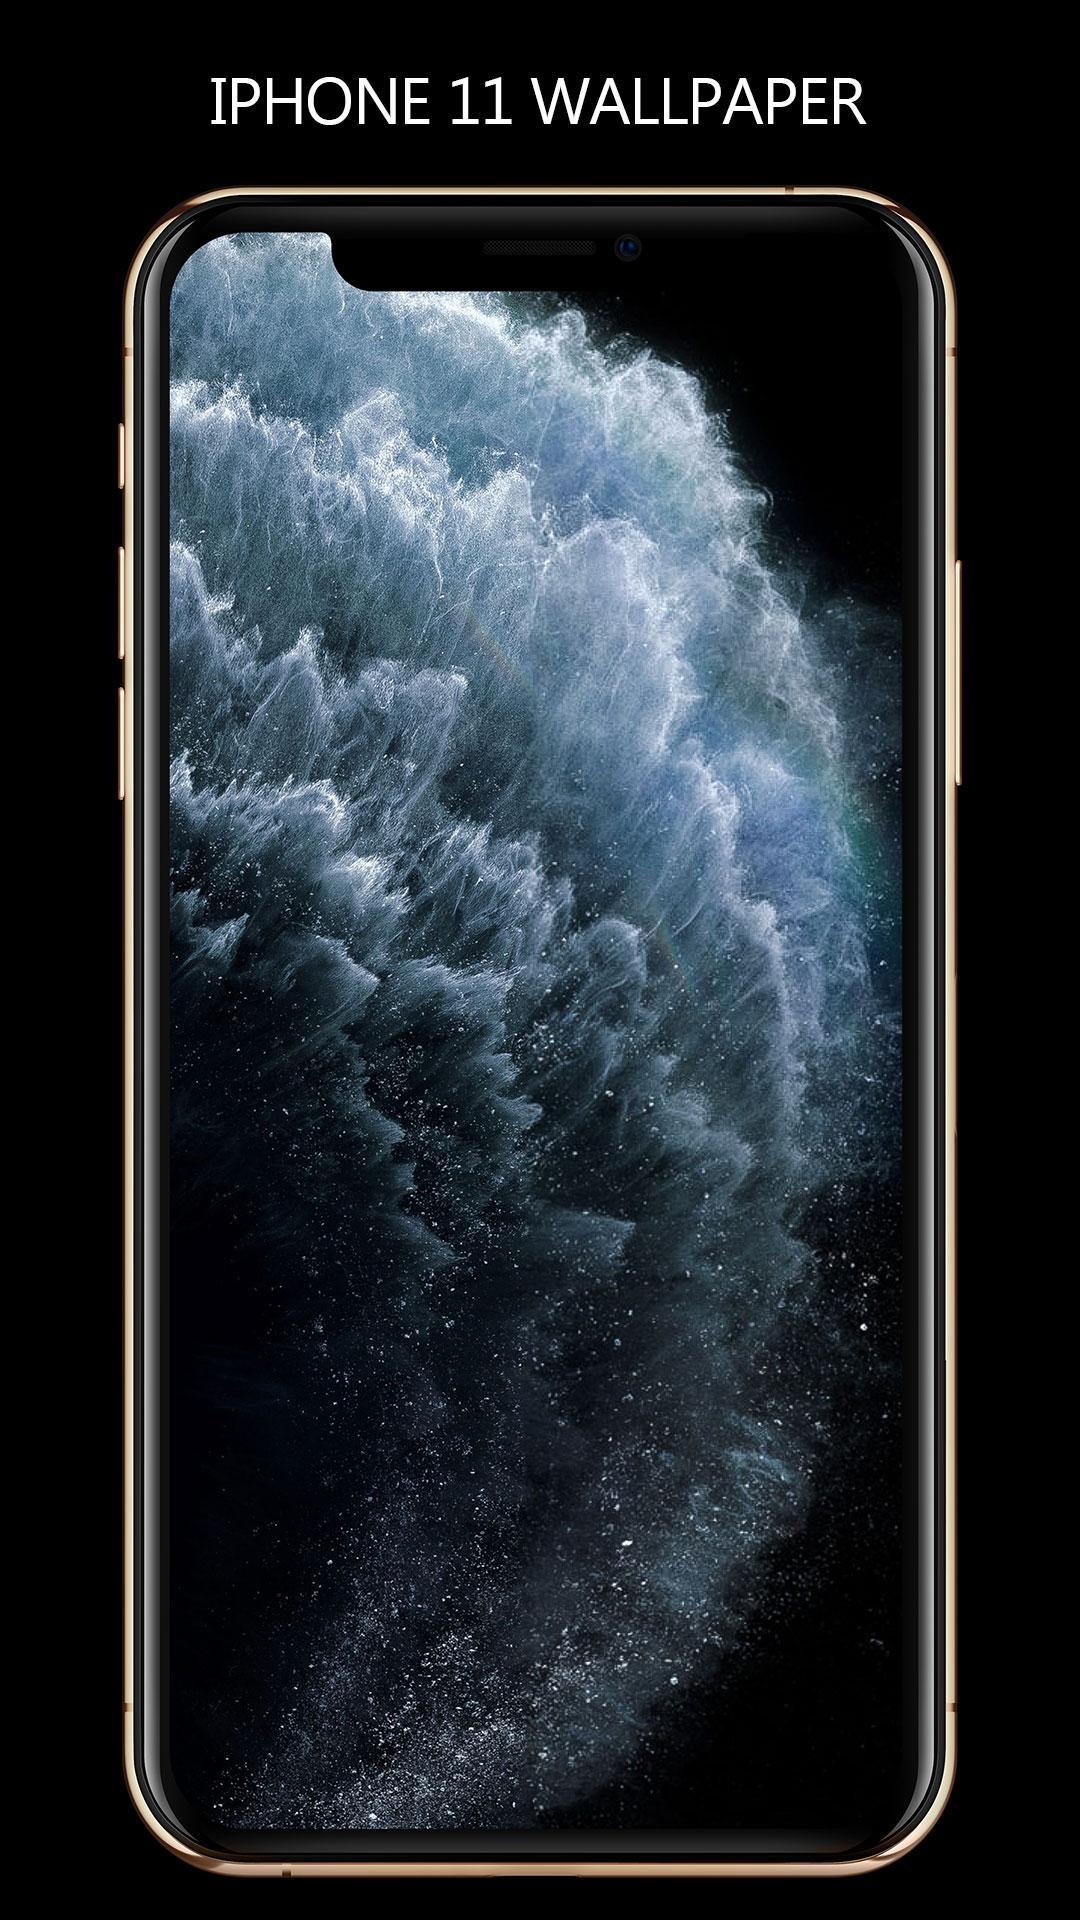 Wallpaper For Iphone 11 Wallpapers Ios 13 For Android Apk